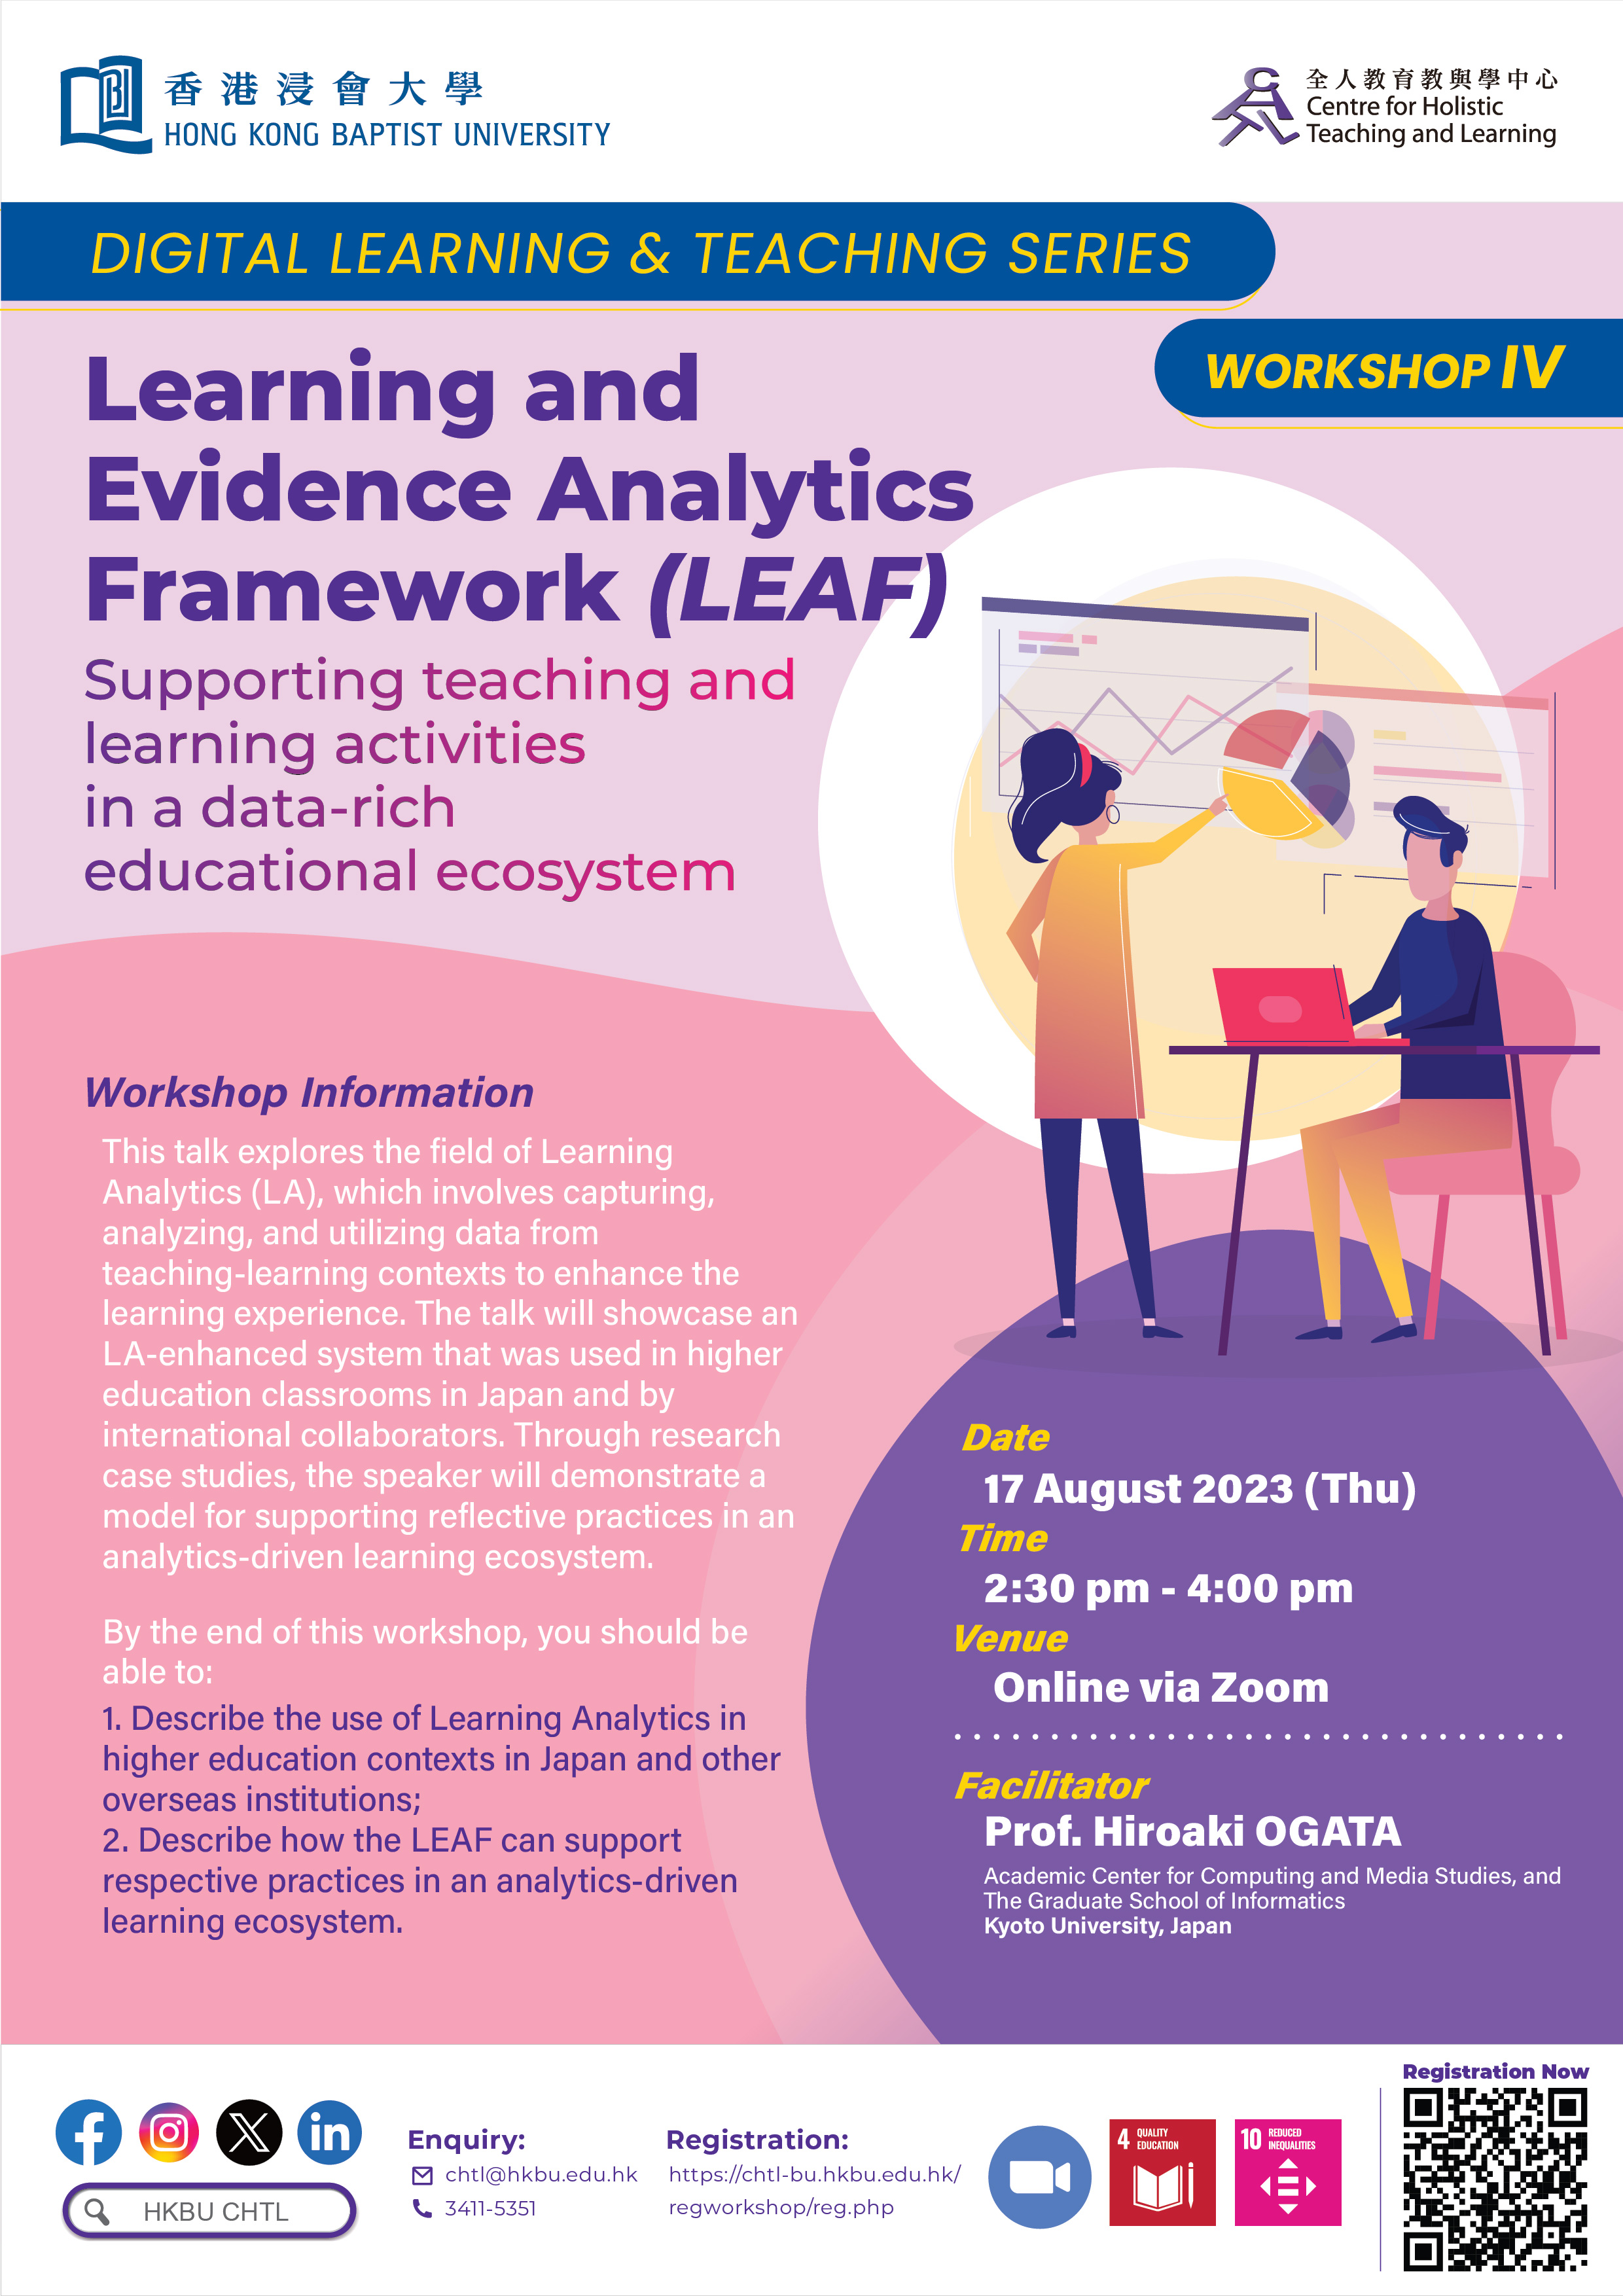 Workshop IV: Learning And Evidence Analytics Framework (LEAF): Supporting Teaching and Learning Activities in a Data-Rich Educational Ecosystem